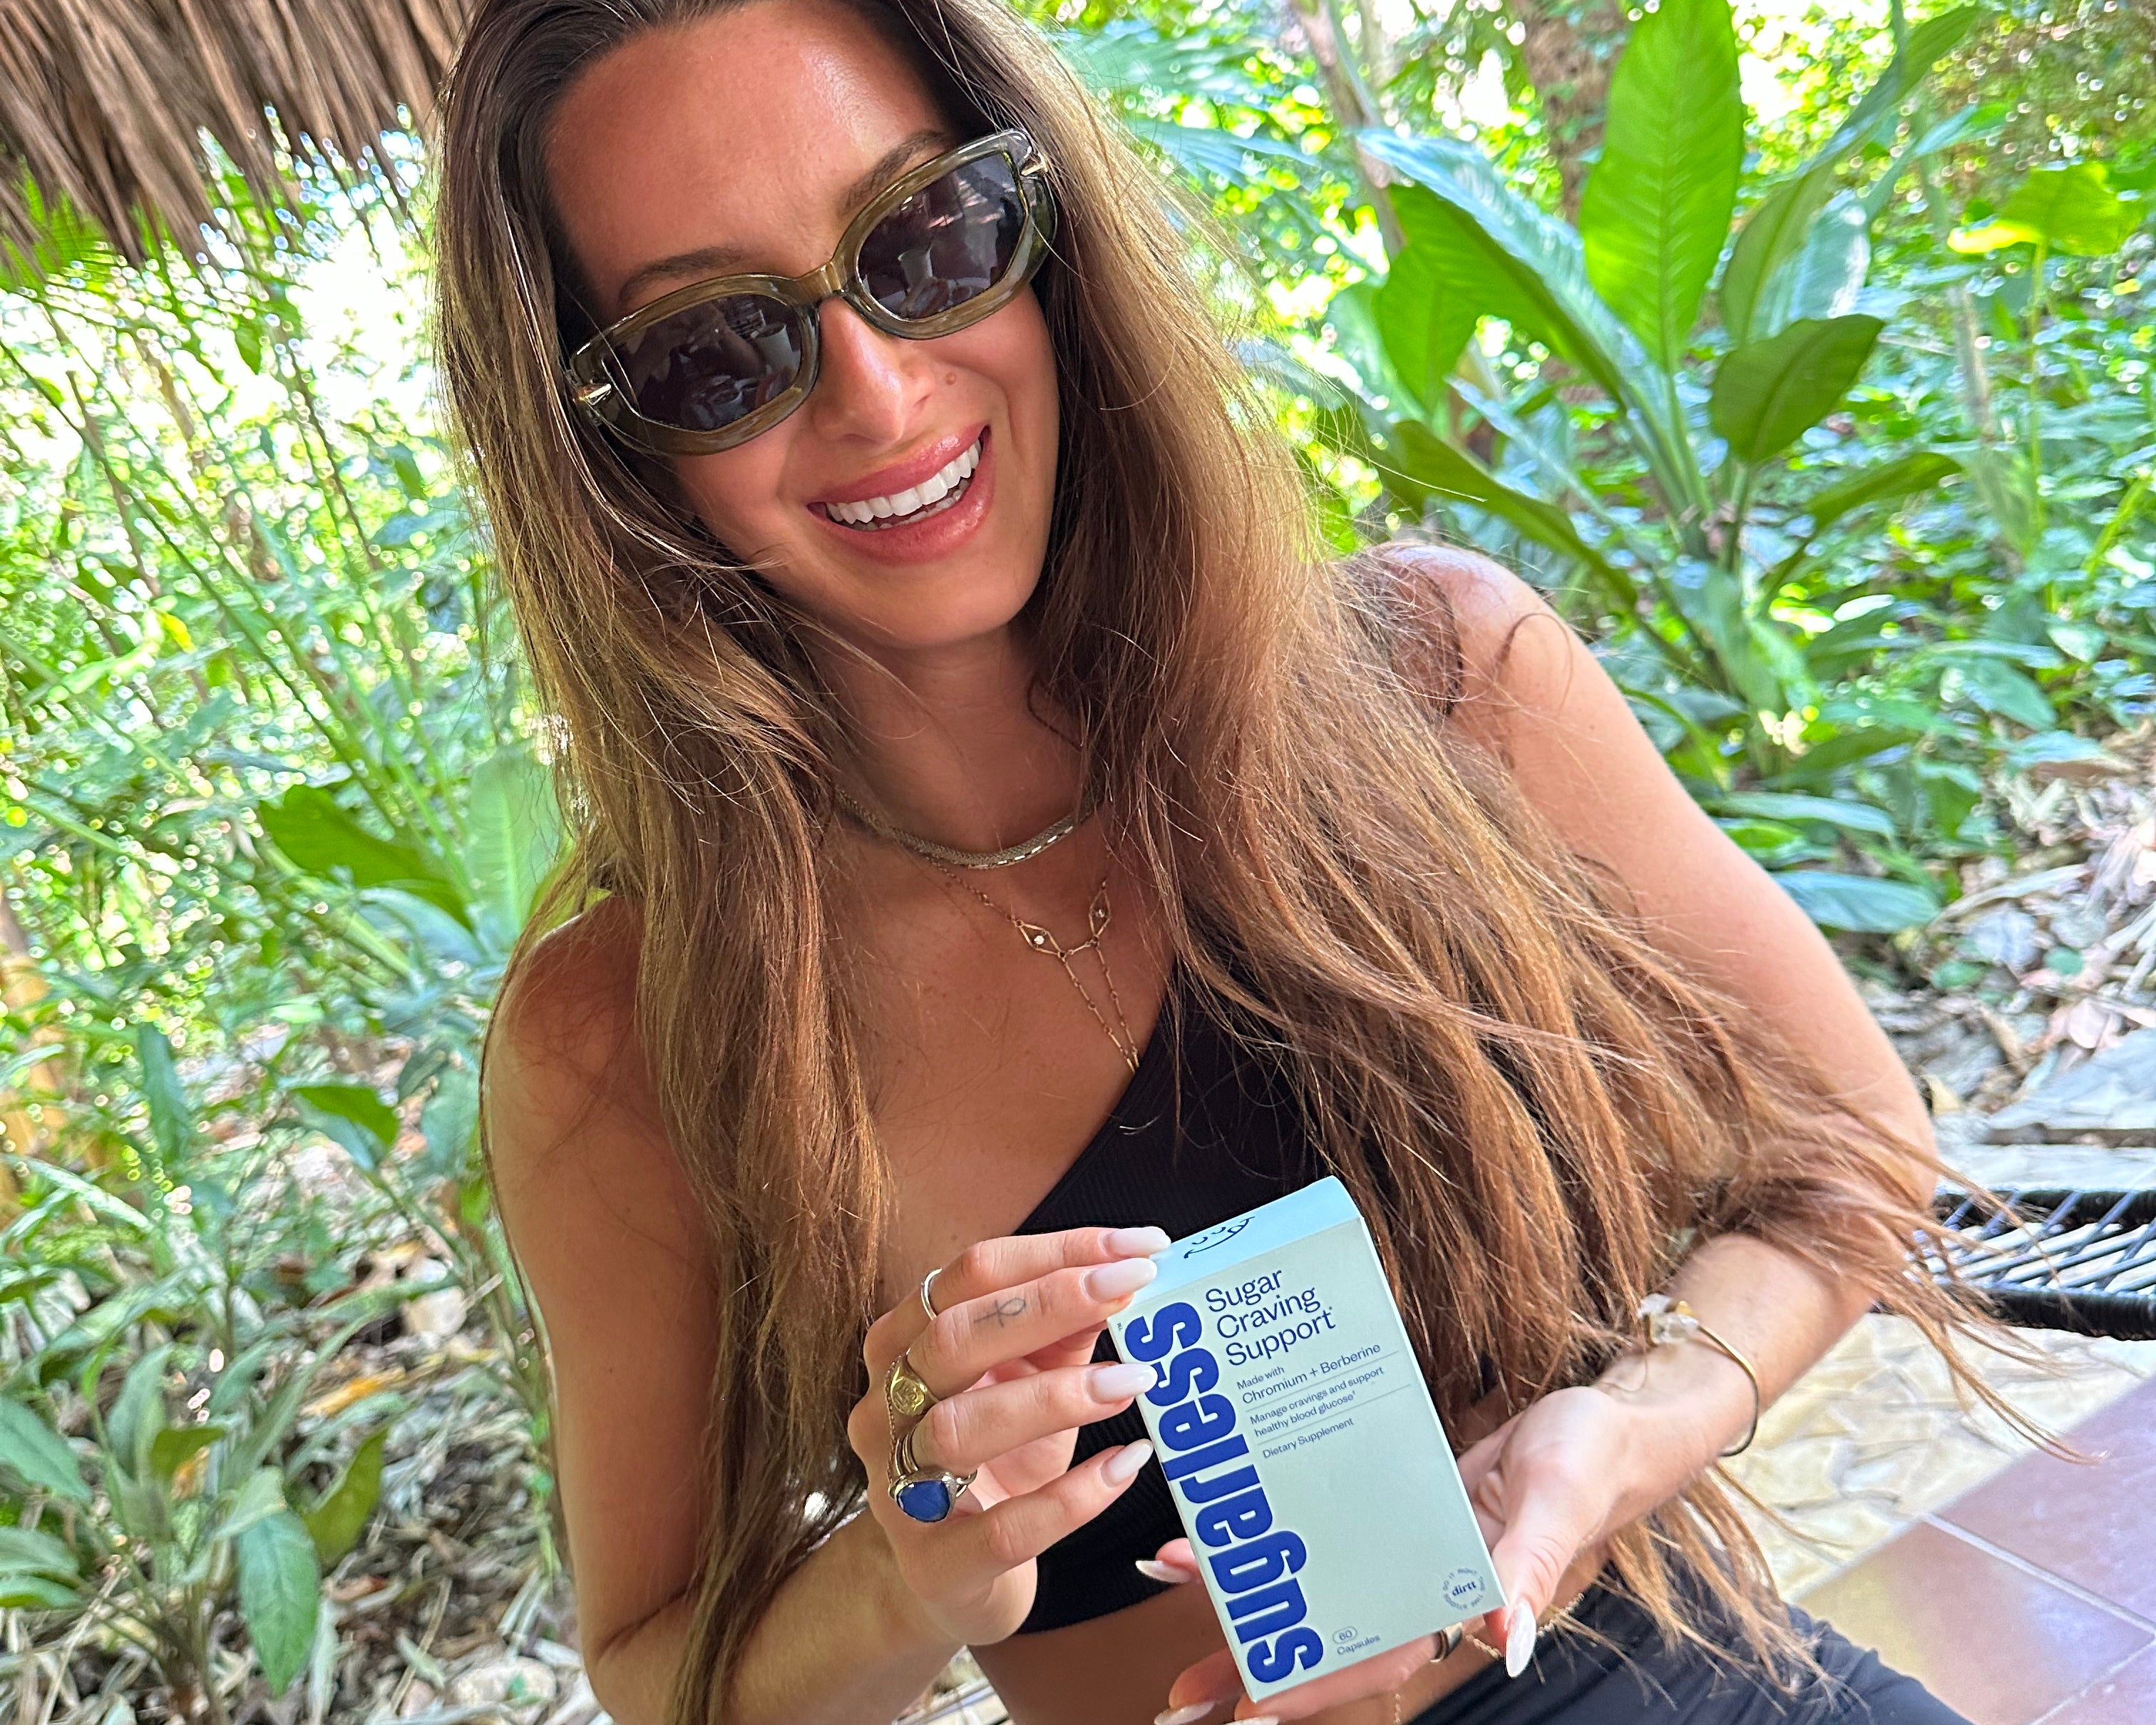 a woman holding a box Sugarless Sugar Craving Support supplement in an outdoor setting